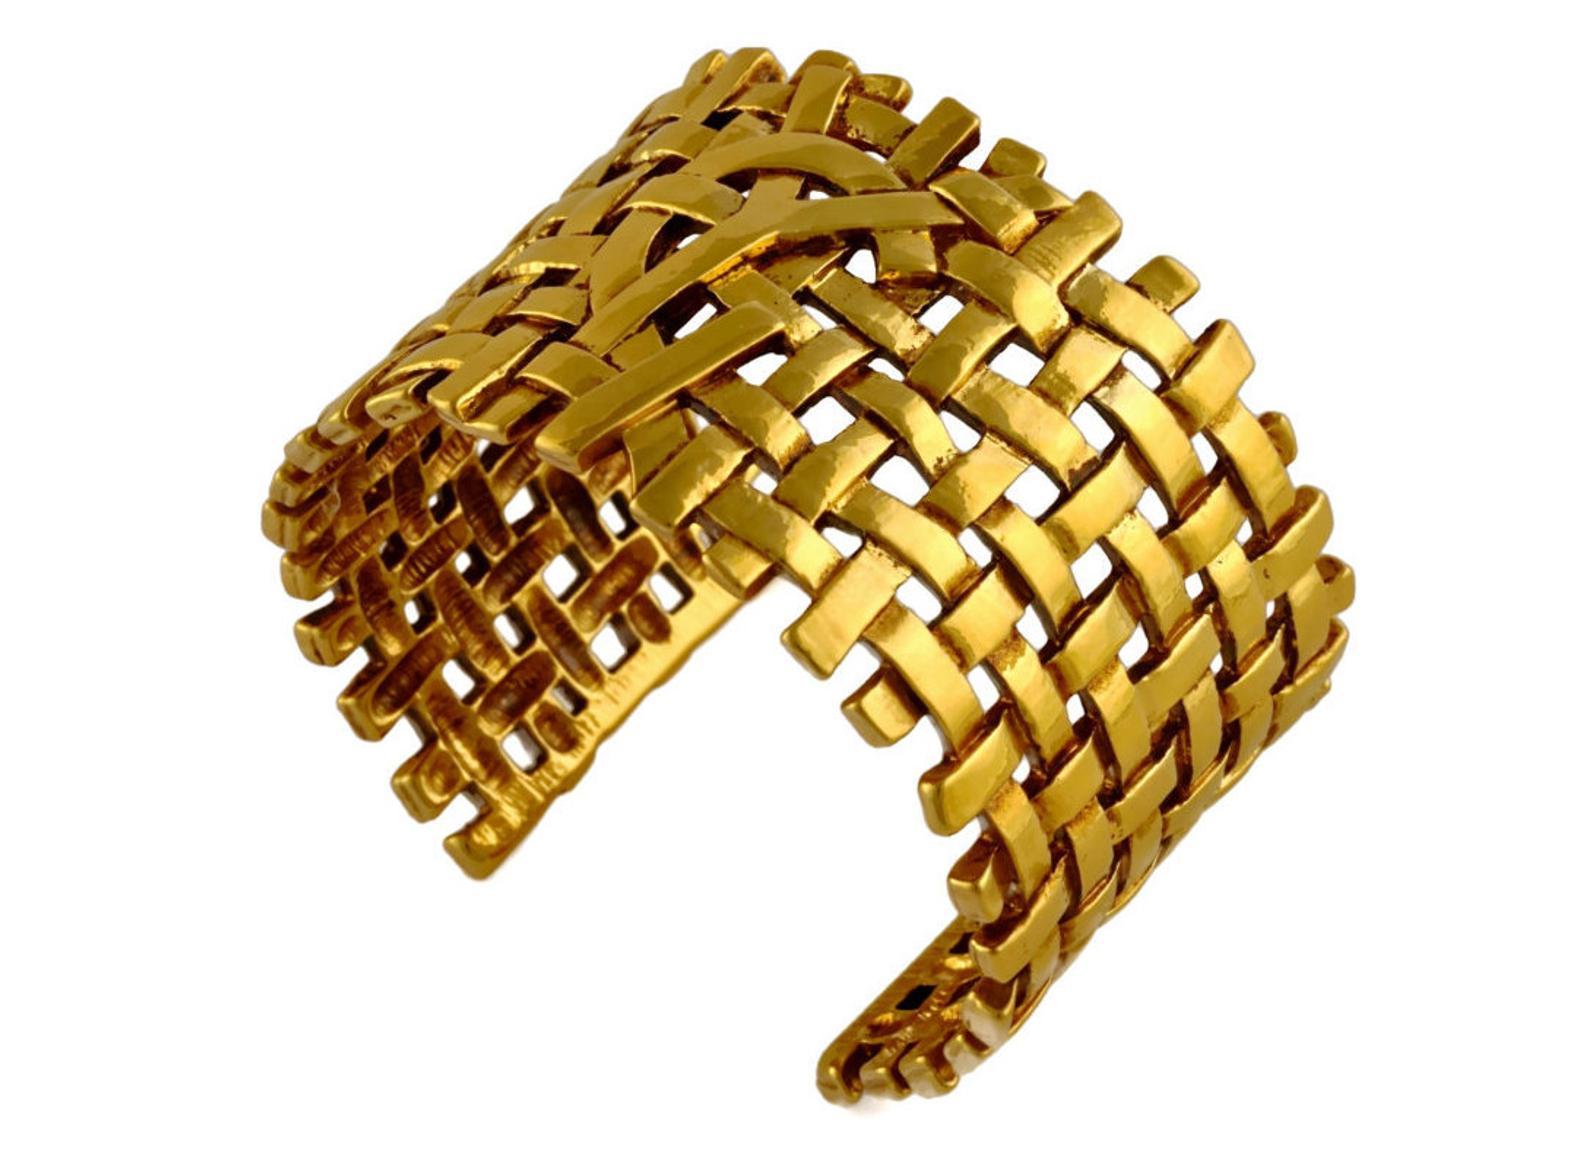 Vintage YVES SAINT LAURENT Logo Woven Cuff Bracelet

Measurements:
Height: 1 5/8 inches
Inside Diameter: 2 2/8 inches (across)
Opening: 1 2/8 inches

Features:
- 100% Authentic YVES SAINT LAURENT.
- Woven metal bracelet cuff.
- Raised YSL logo at